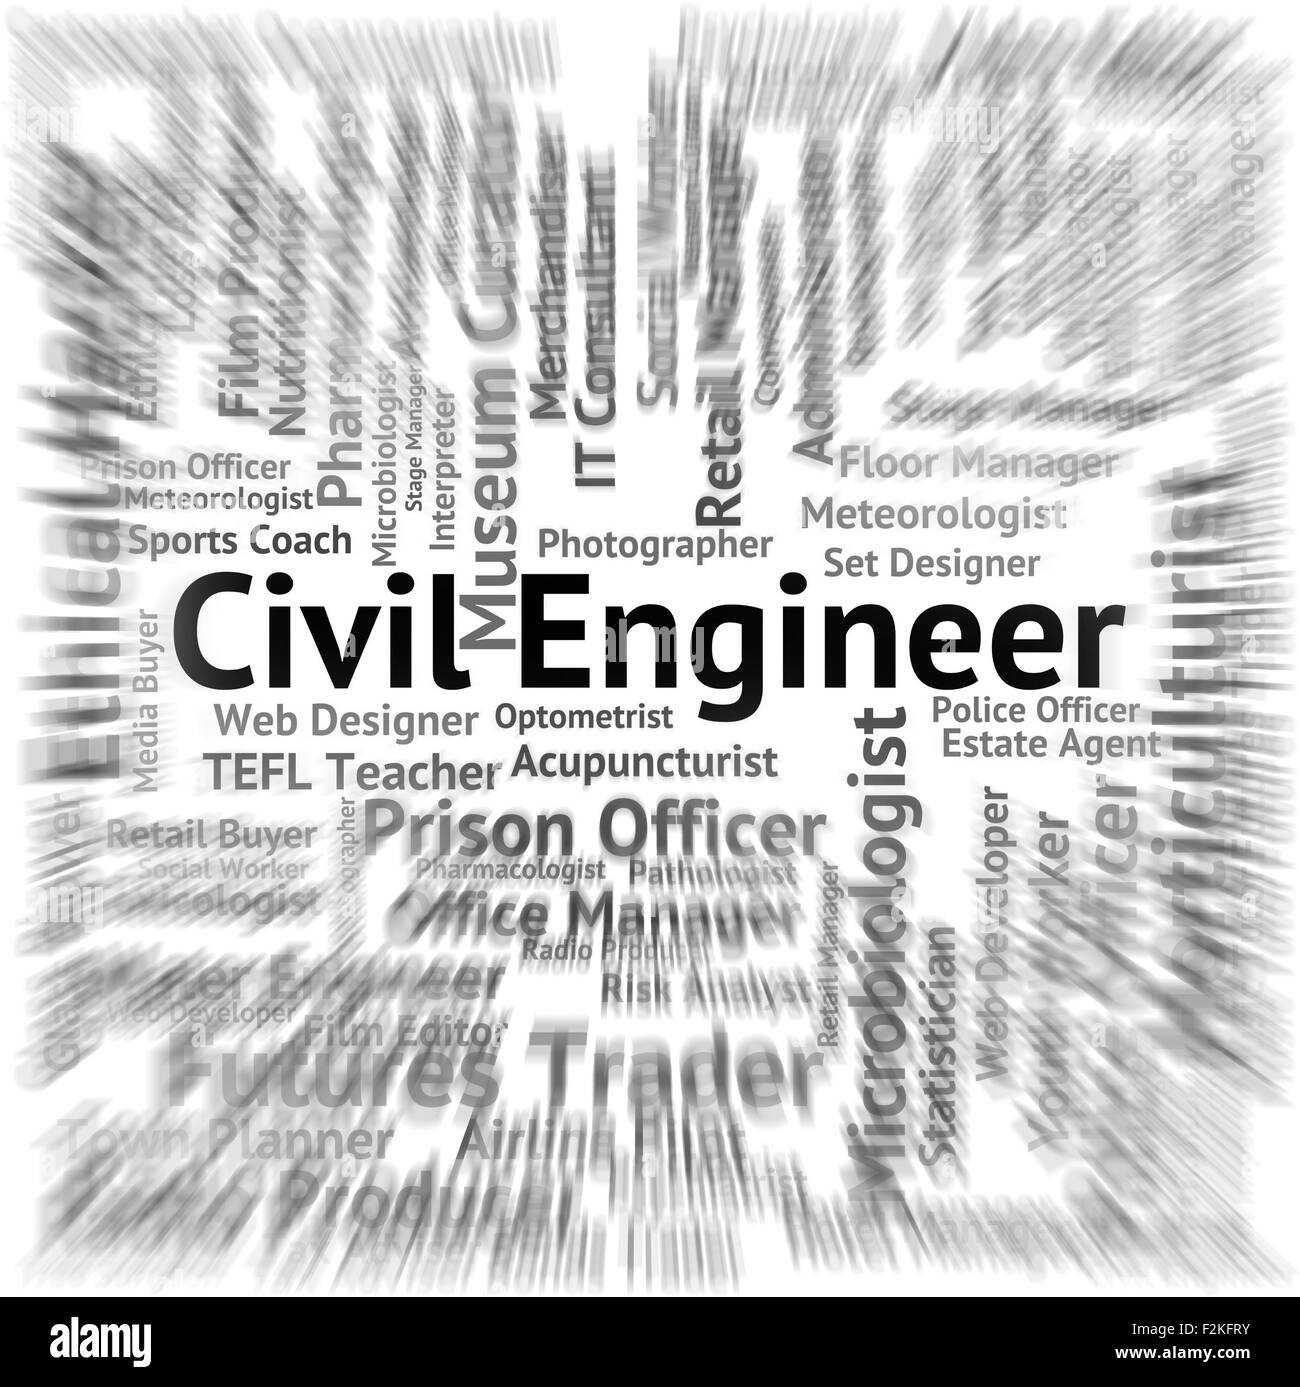 Civil Engineer Meaning Work Occupation And Text Stock Photo - Alamy